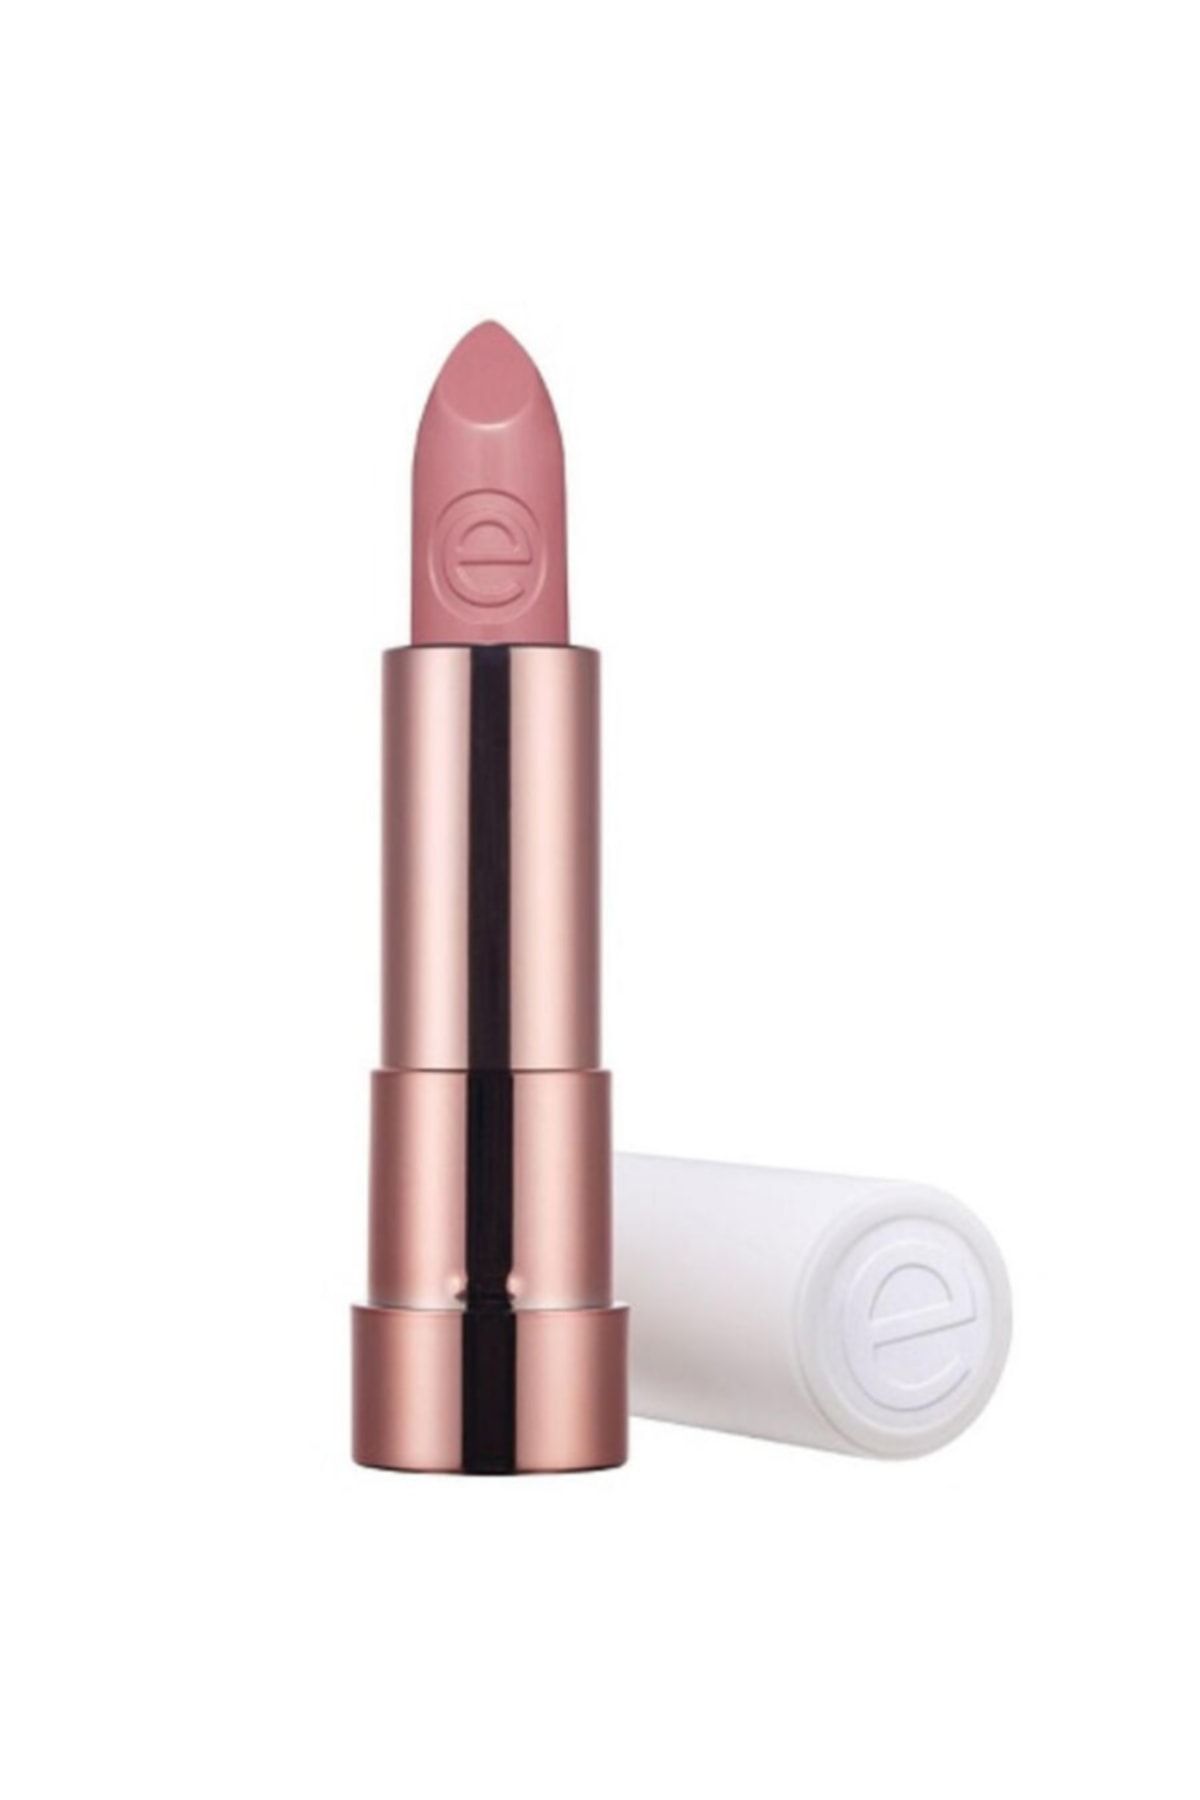 Essence This Is Me Lipstick - Ruj No: 25 Lovely